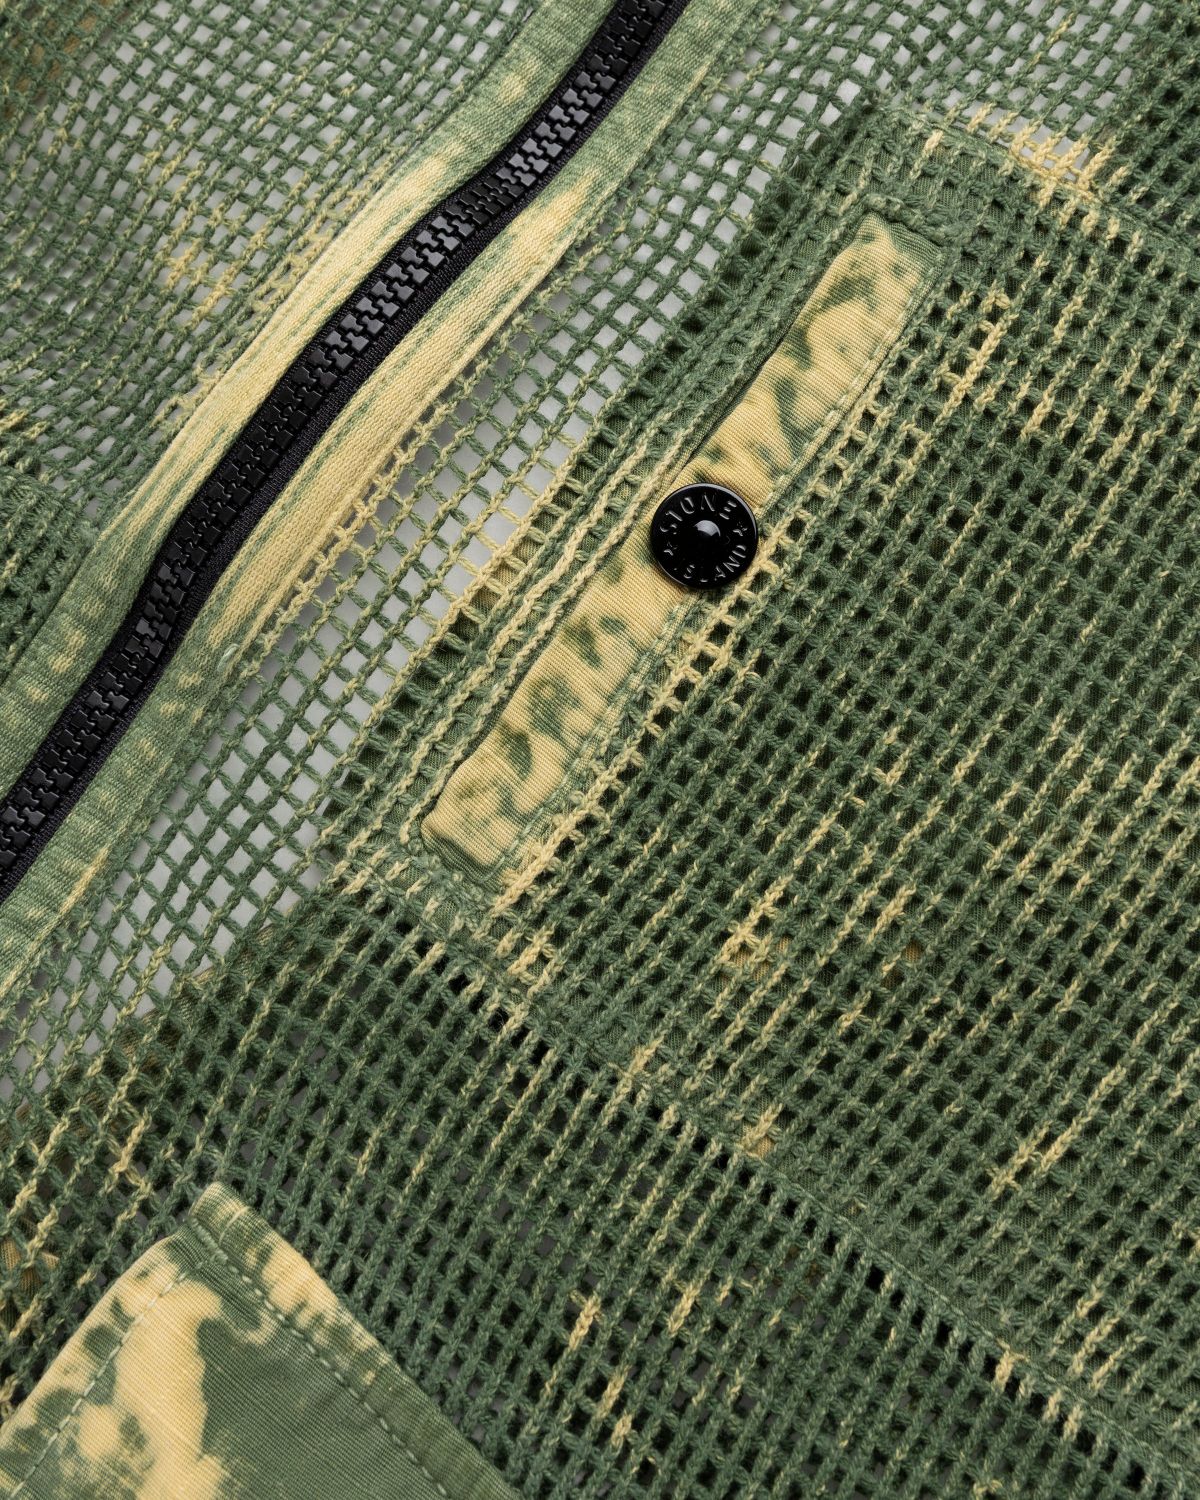 Stone Island – G0622 Garment-Dyed Cotton Mesh Vest Olive - Outerwear - Green - Image 5